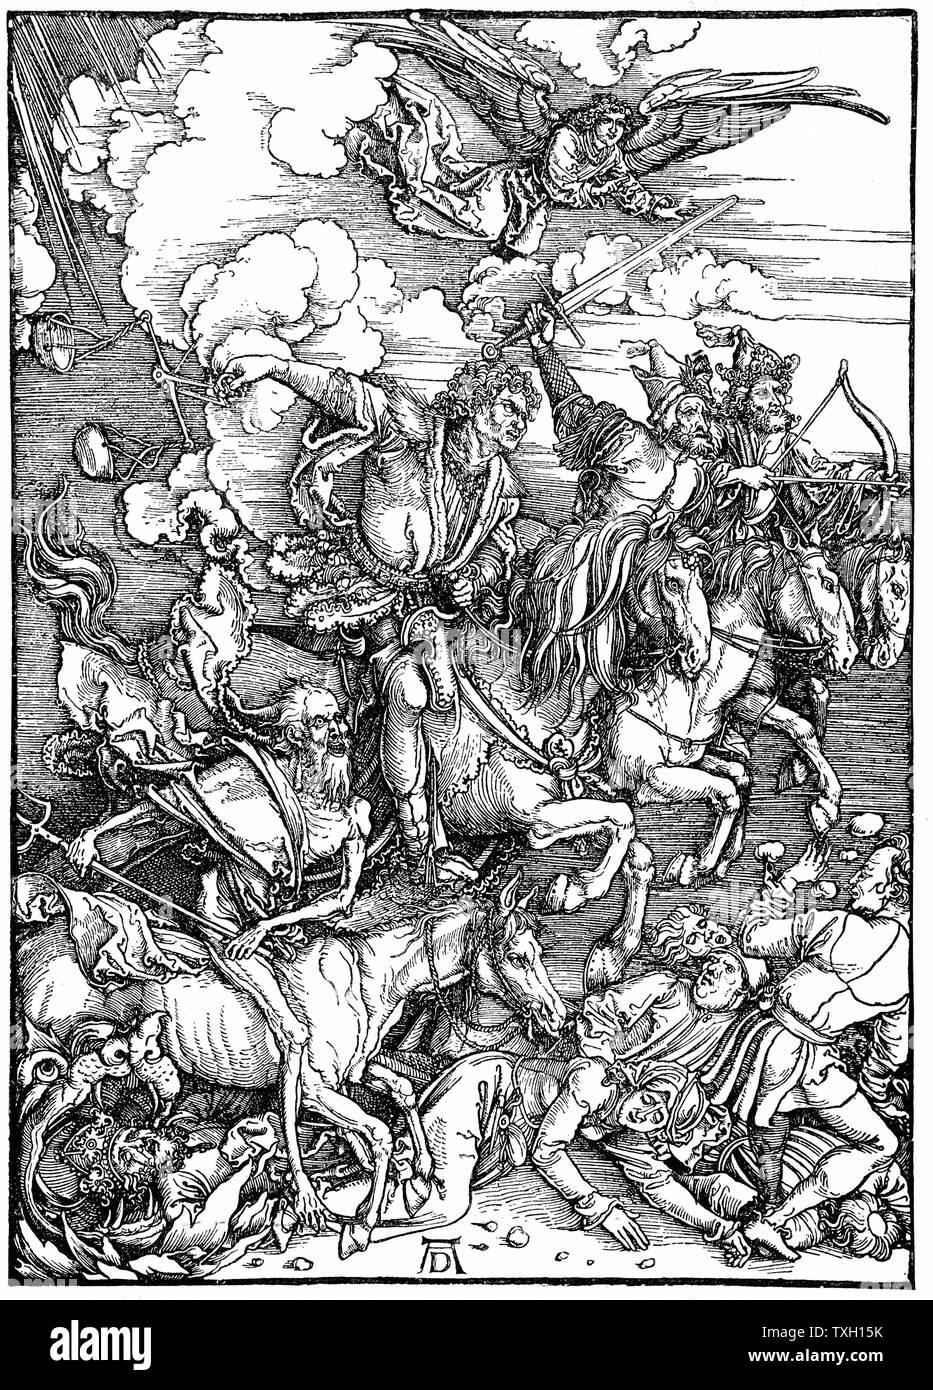 Four Horsemen of the Apocalypse, illustrating 'Bible' Revelation of St John. Archangel watches as four agents of destruction, two of war and one each of famine and pestilence, gallop across the earth. Woodcut by Albrecht Durer, 1498. Stock Photo